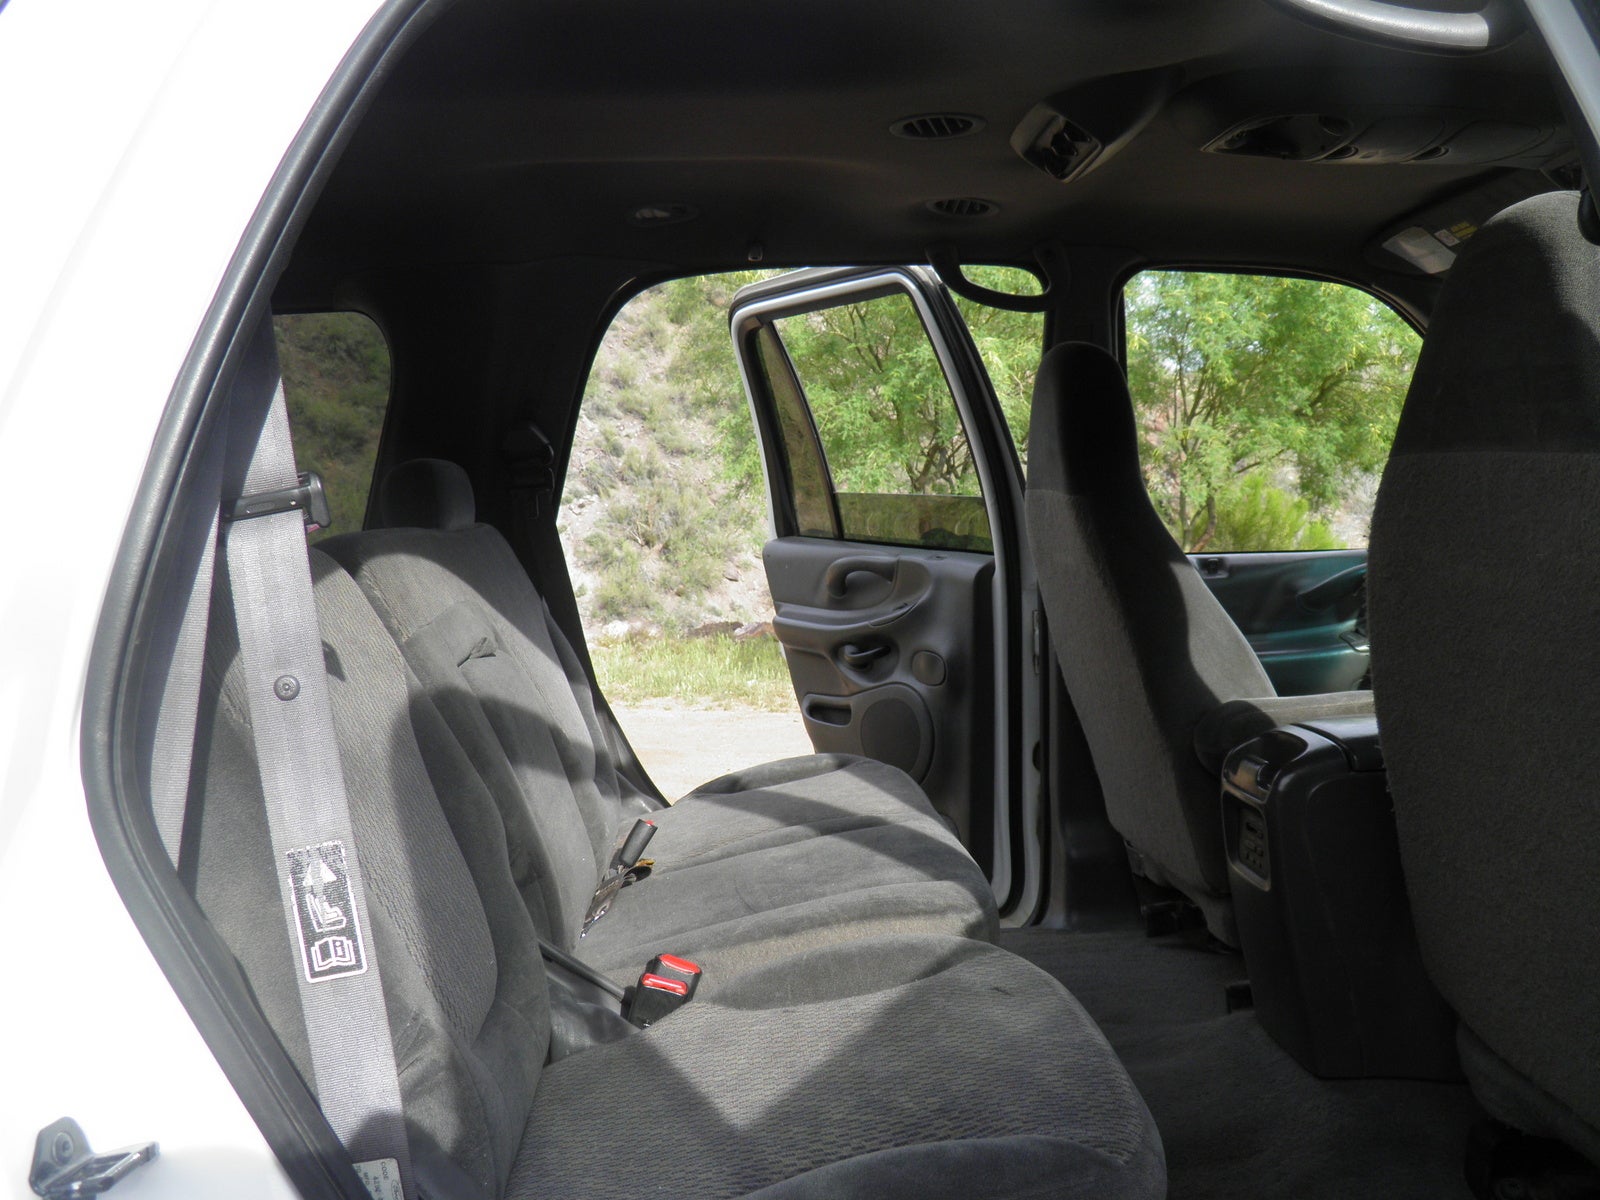 1999 Ford expedition xlt interior #6